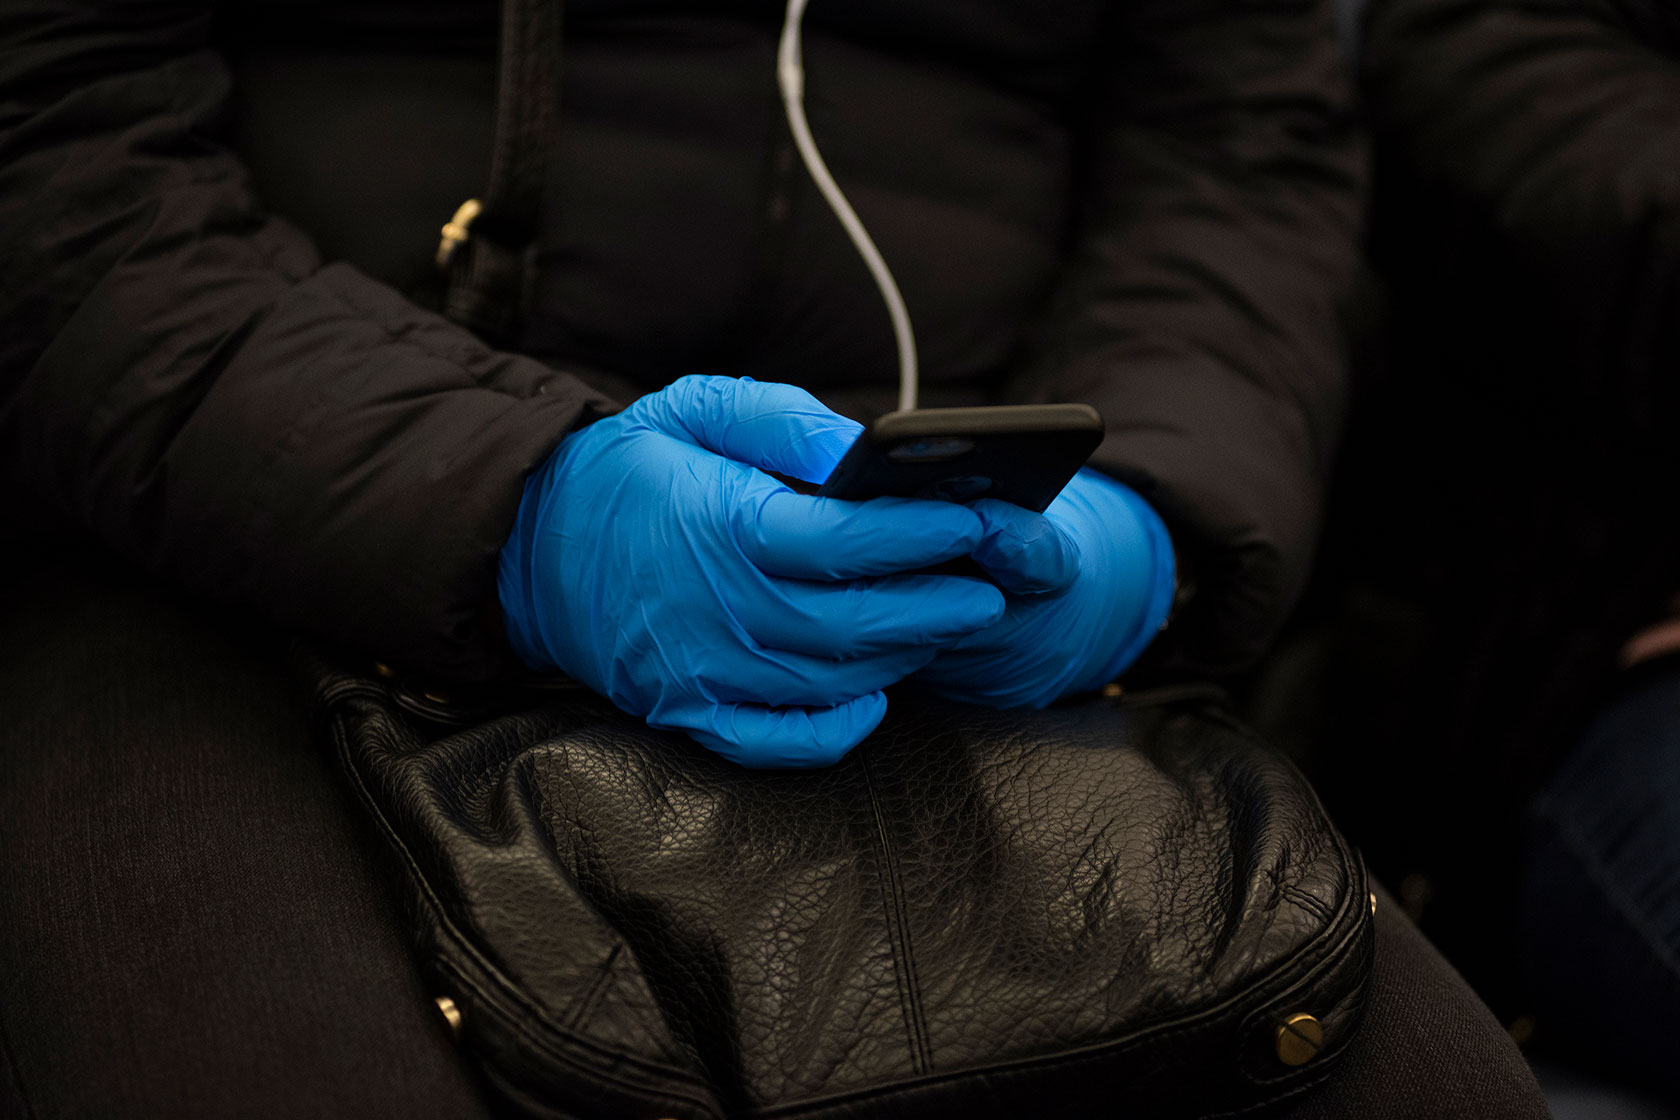 A subway train passenger uses their phone while wearing surgical gloves.